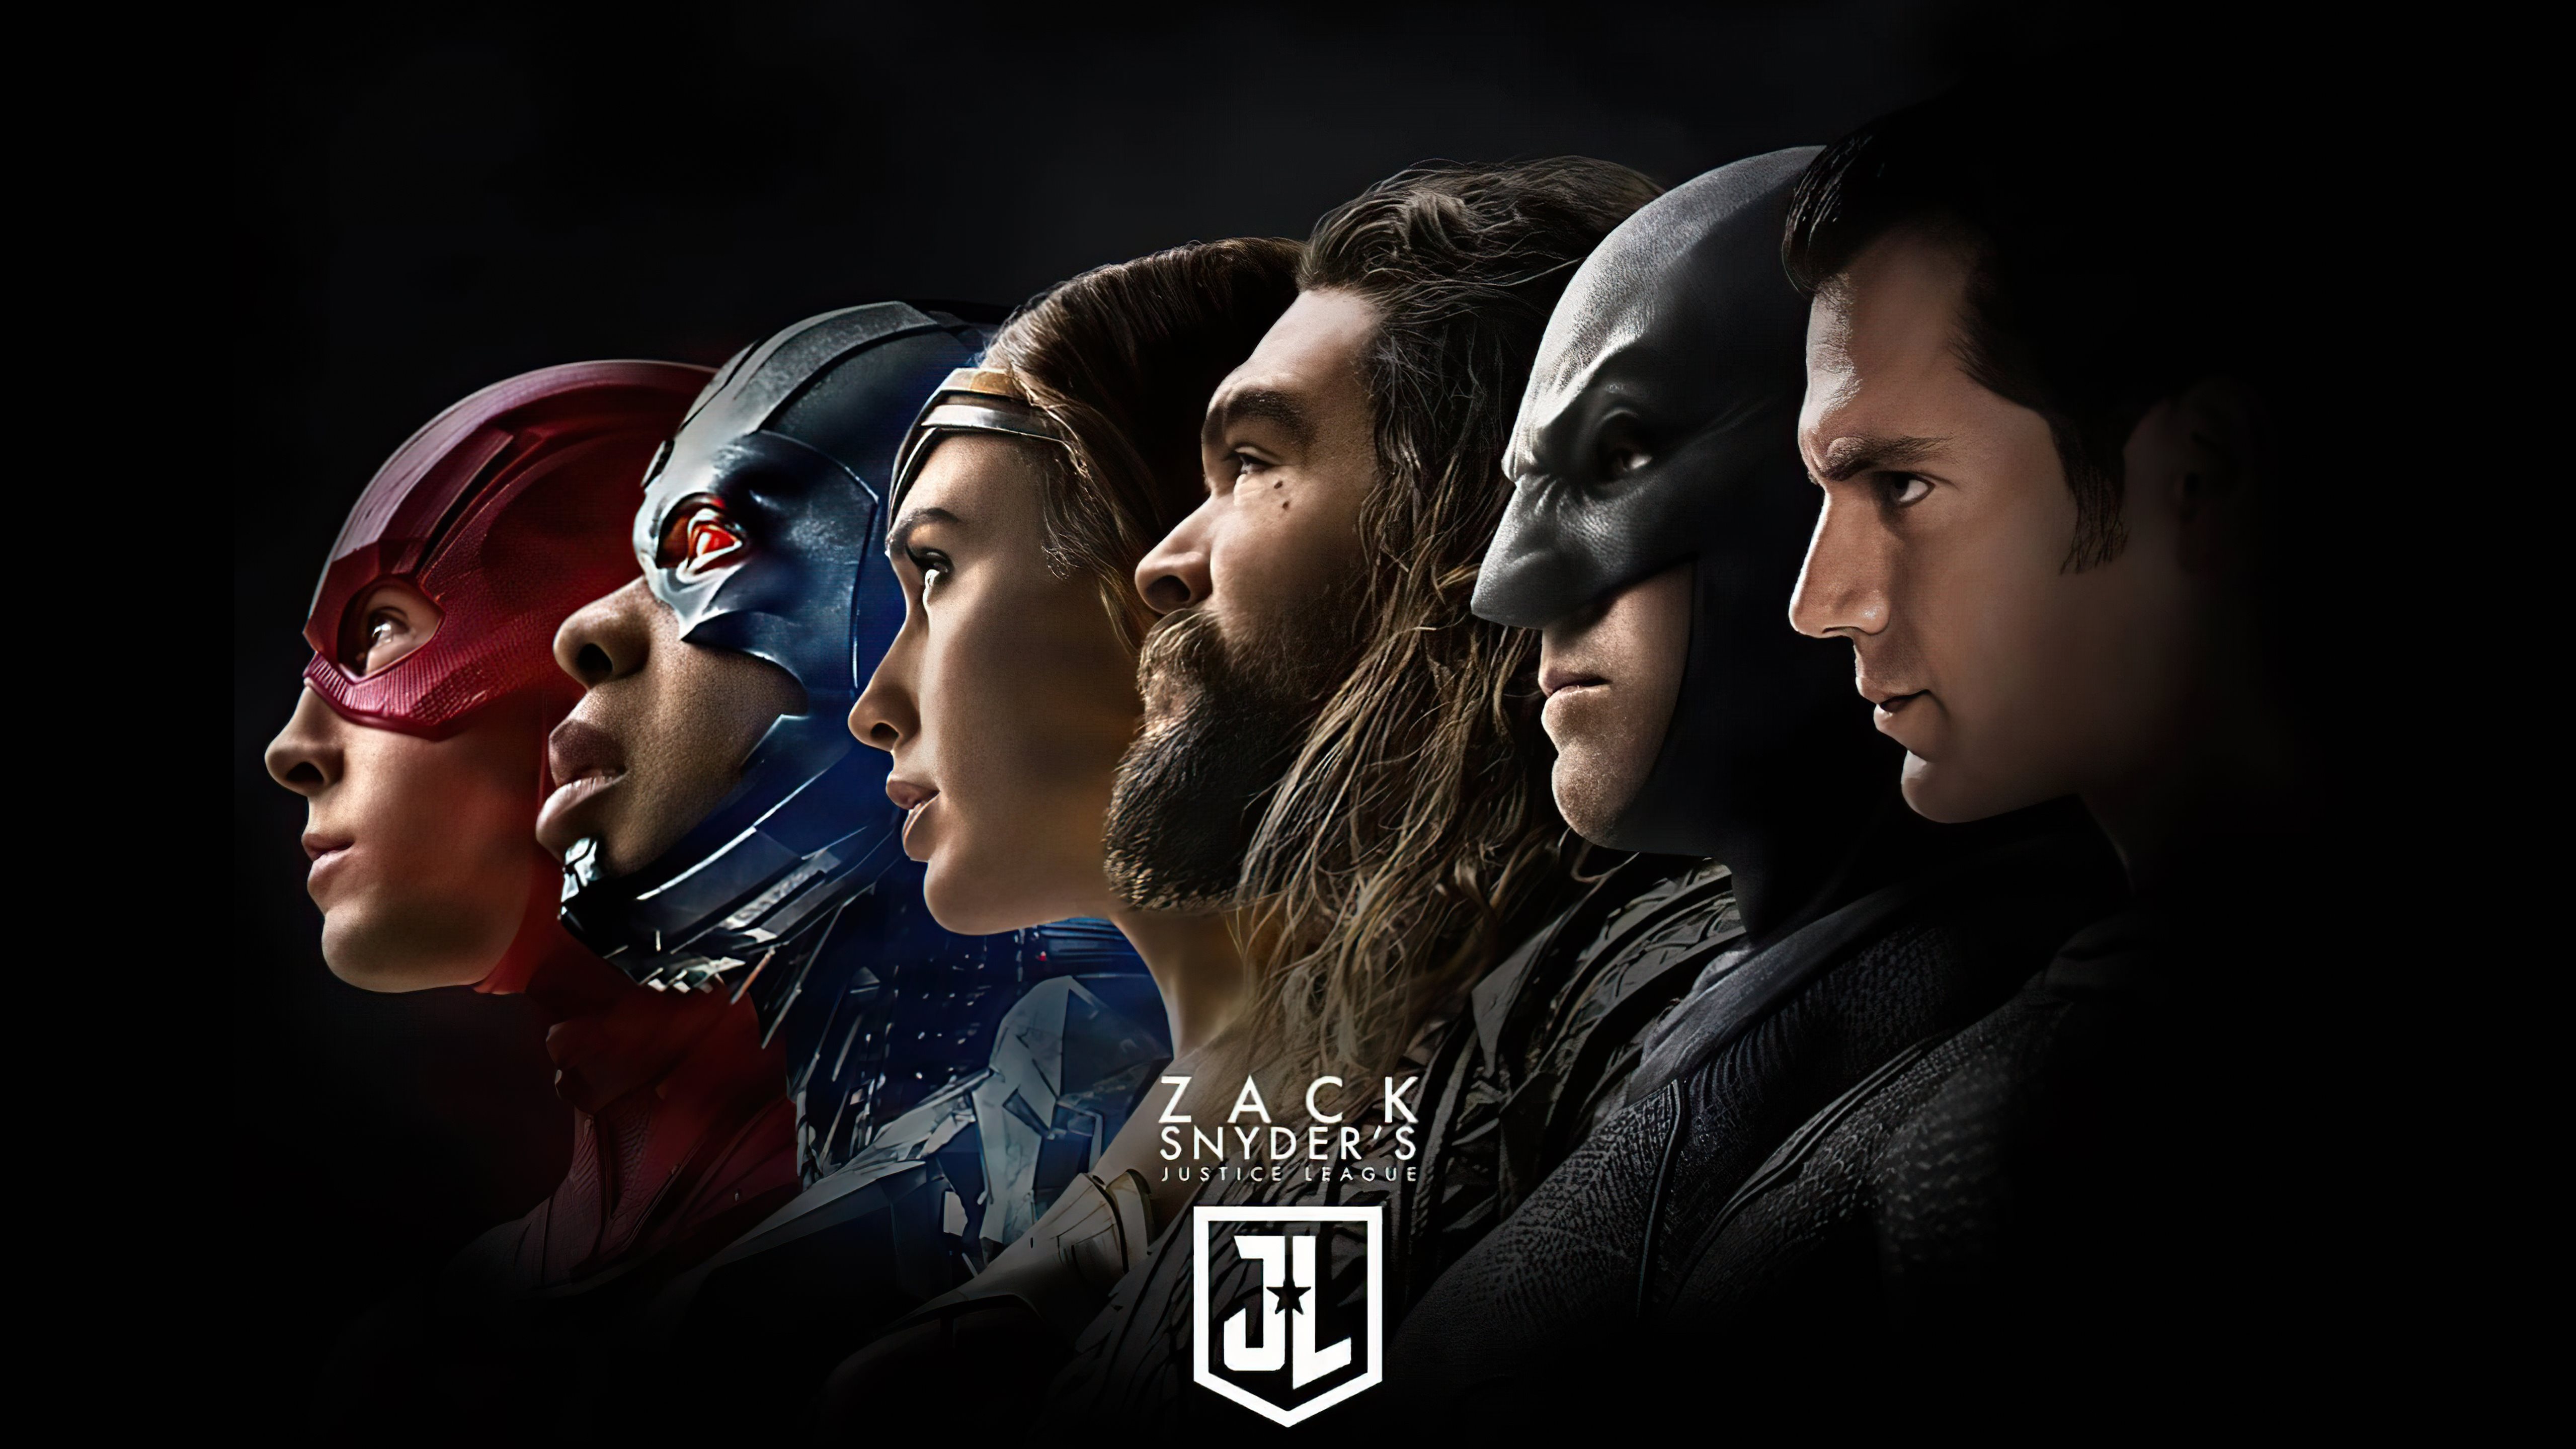 2021 justice league synder cut 5k iMac wallpapers.